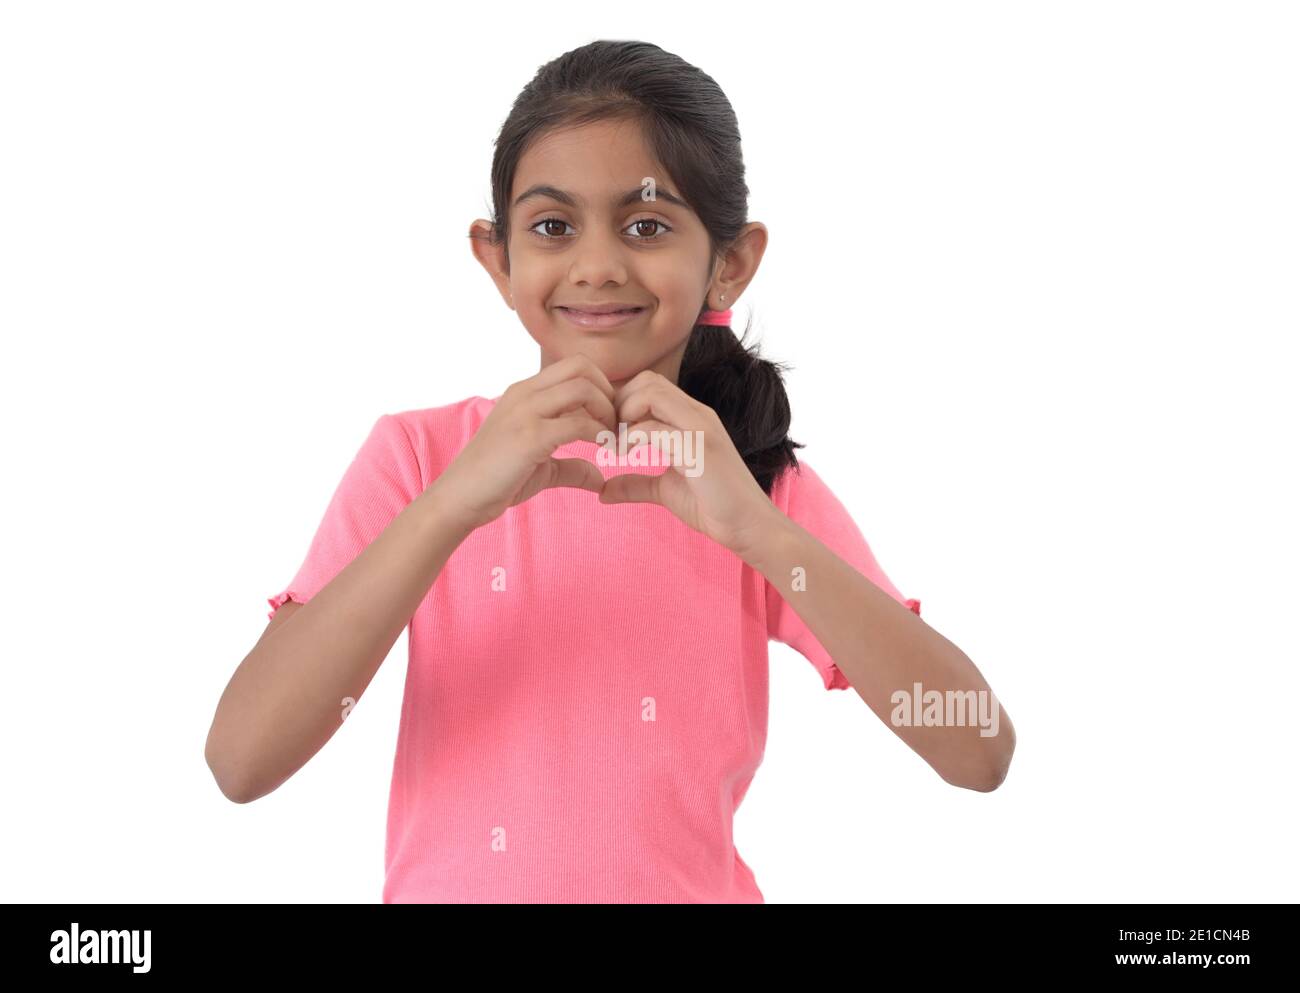 Portrait of a cute little indian girl showing heart shape sign with hands and expressing love. Stock Photo